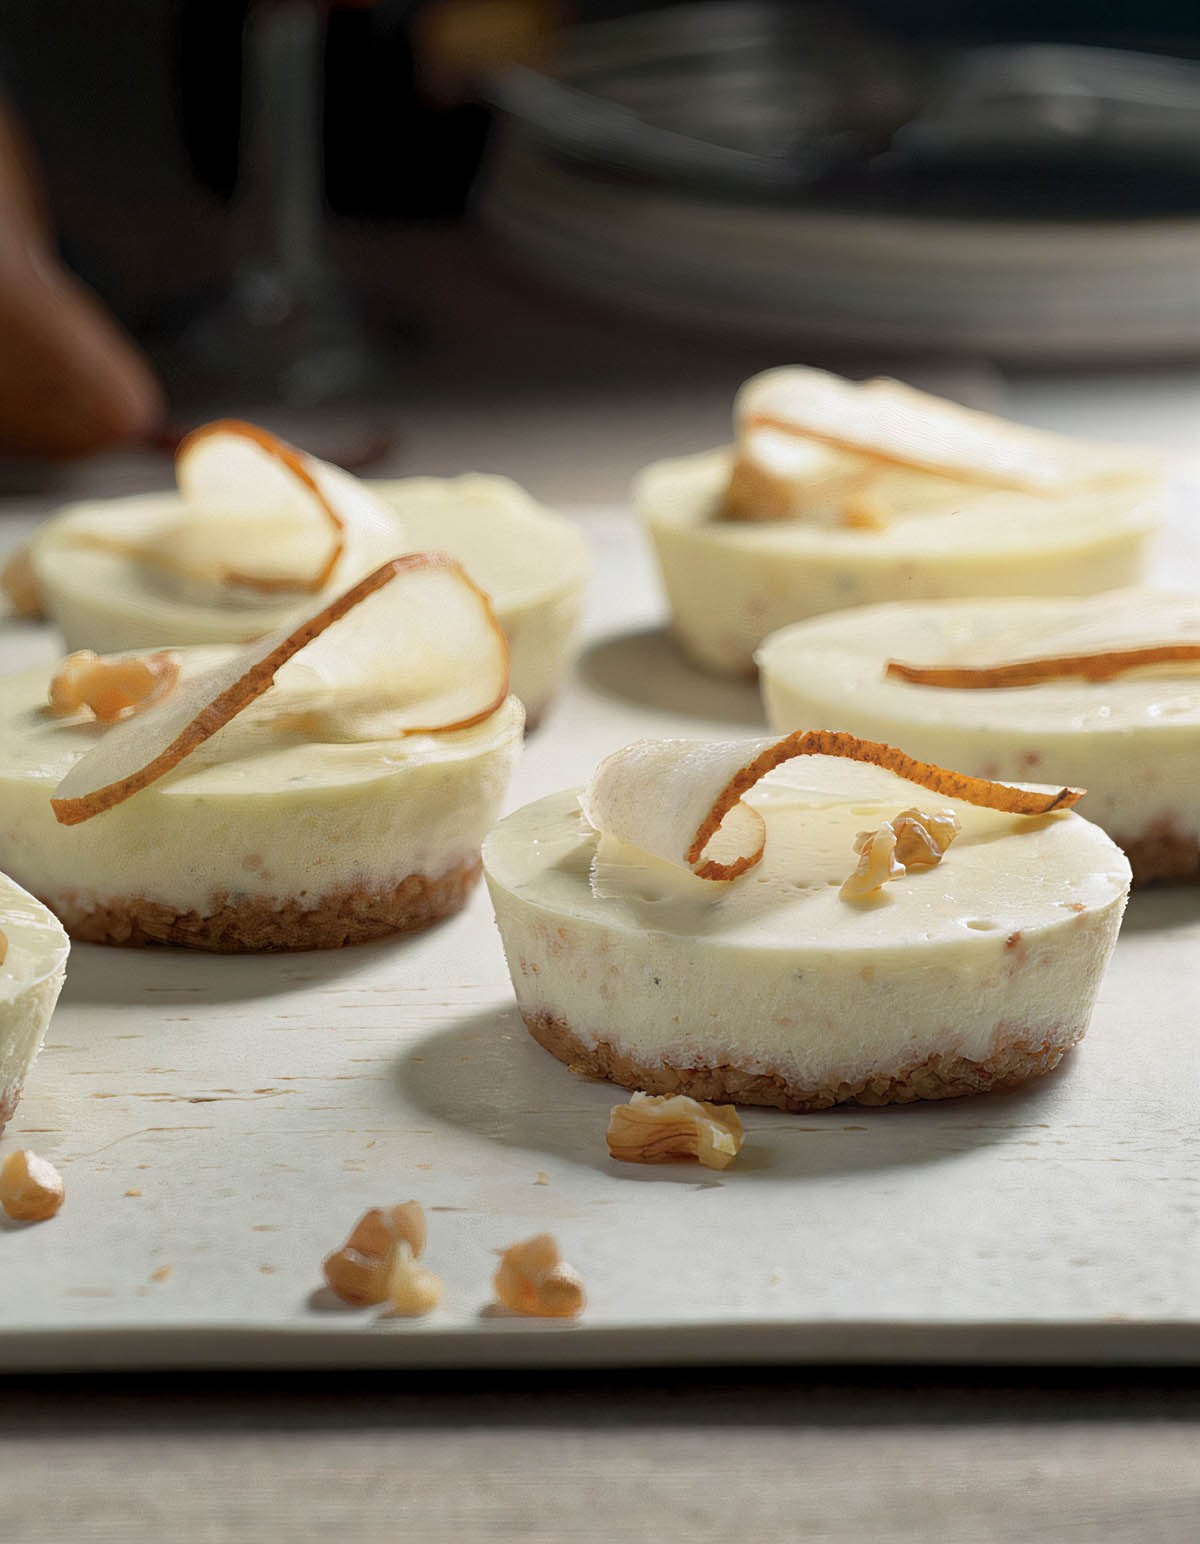 Stilton Baby Blue Cheesecakes from The Baking Bible by Rose Levy Beranbaum